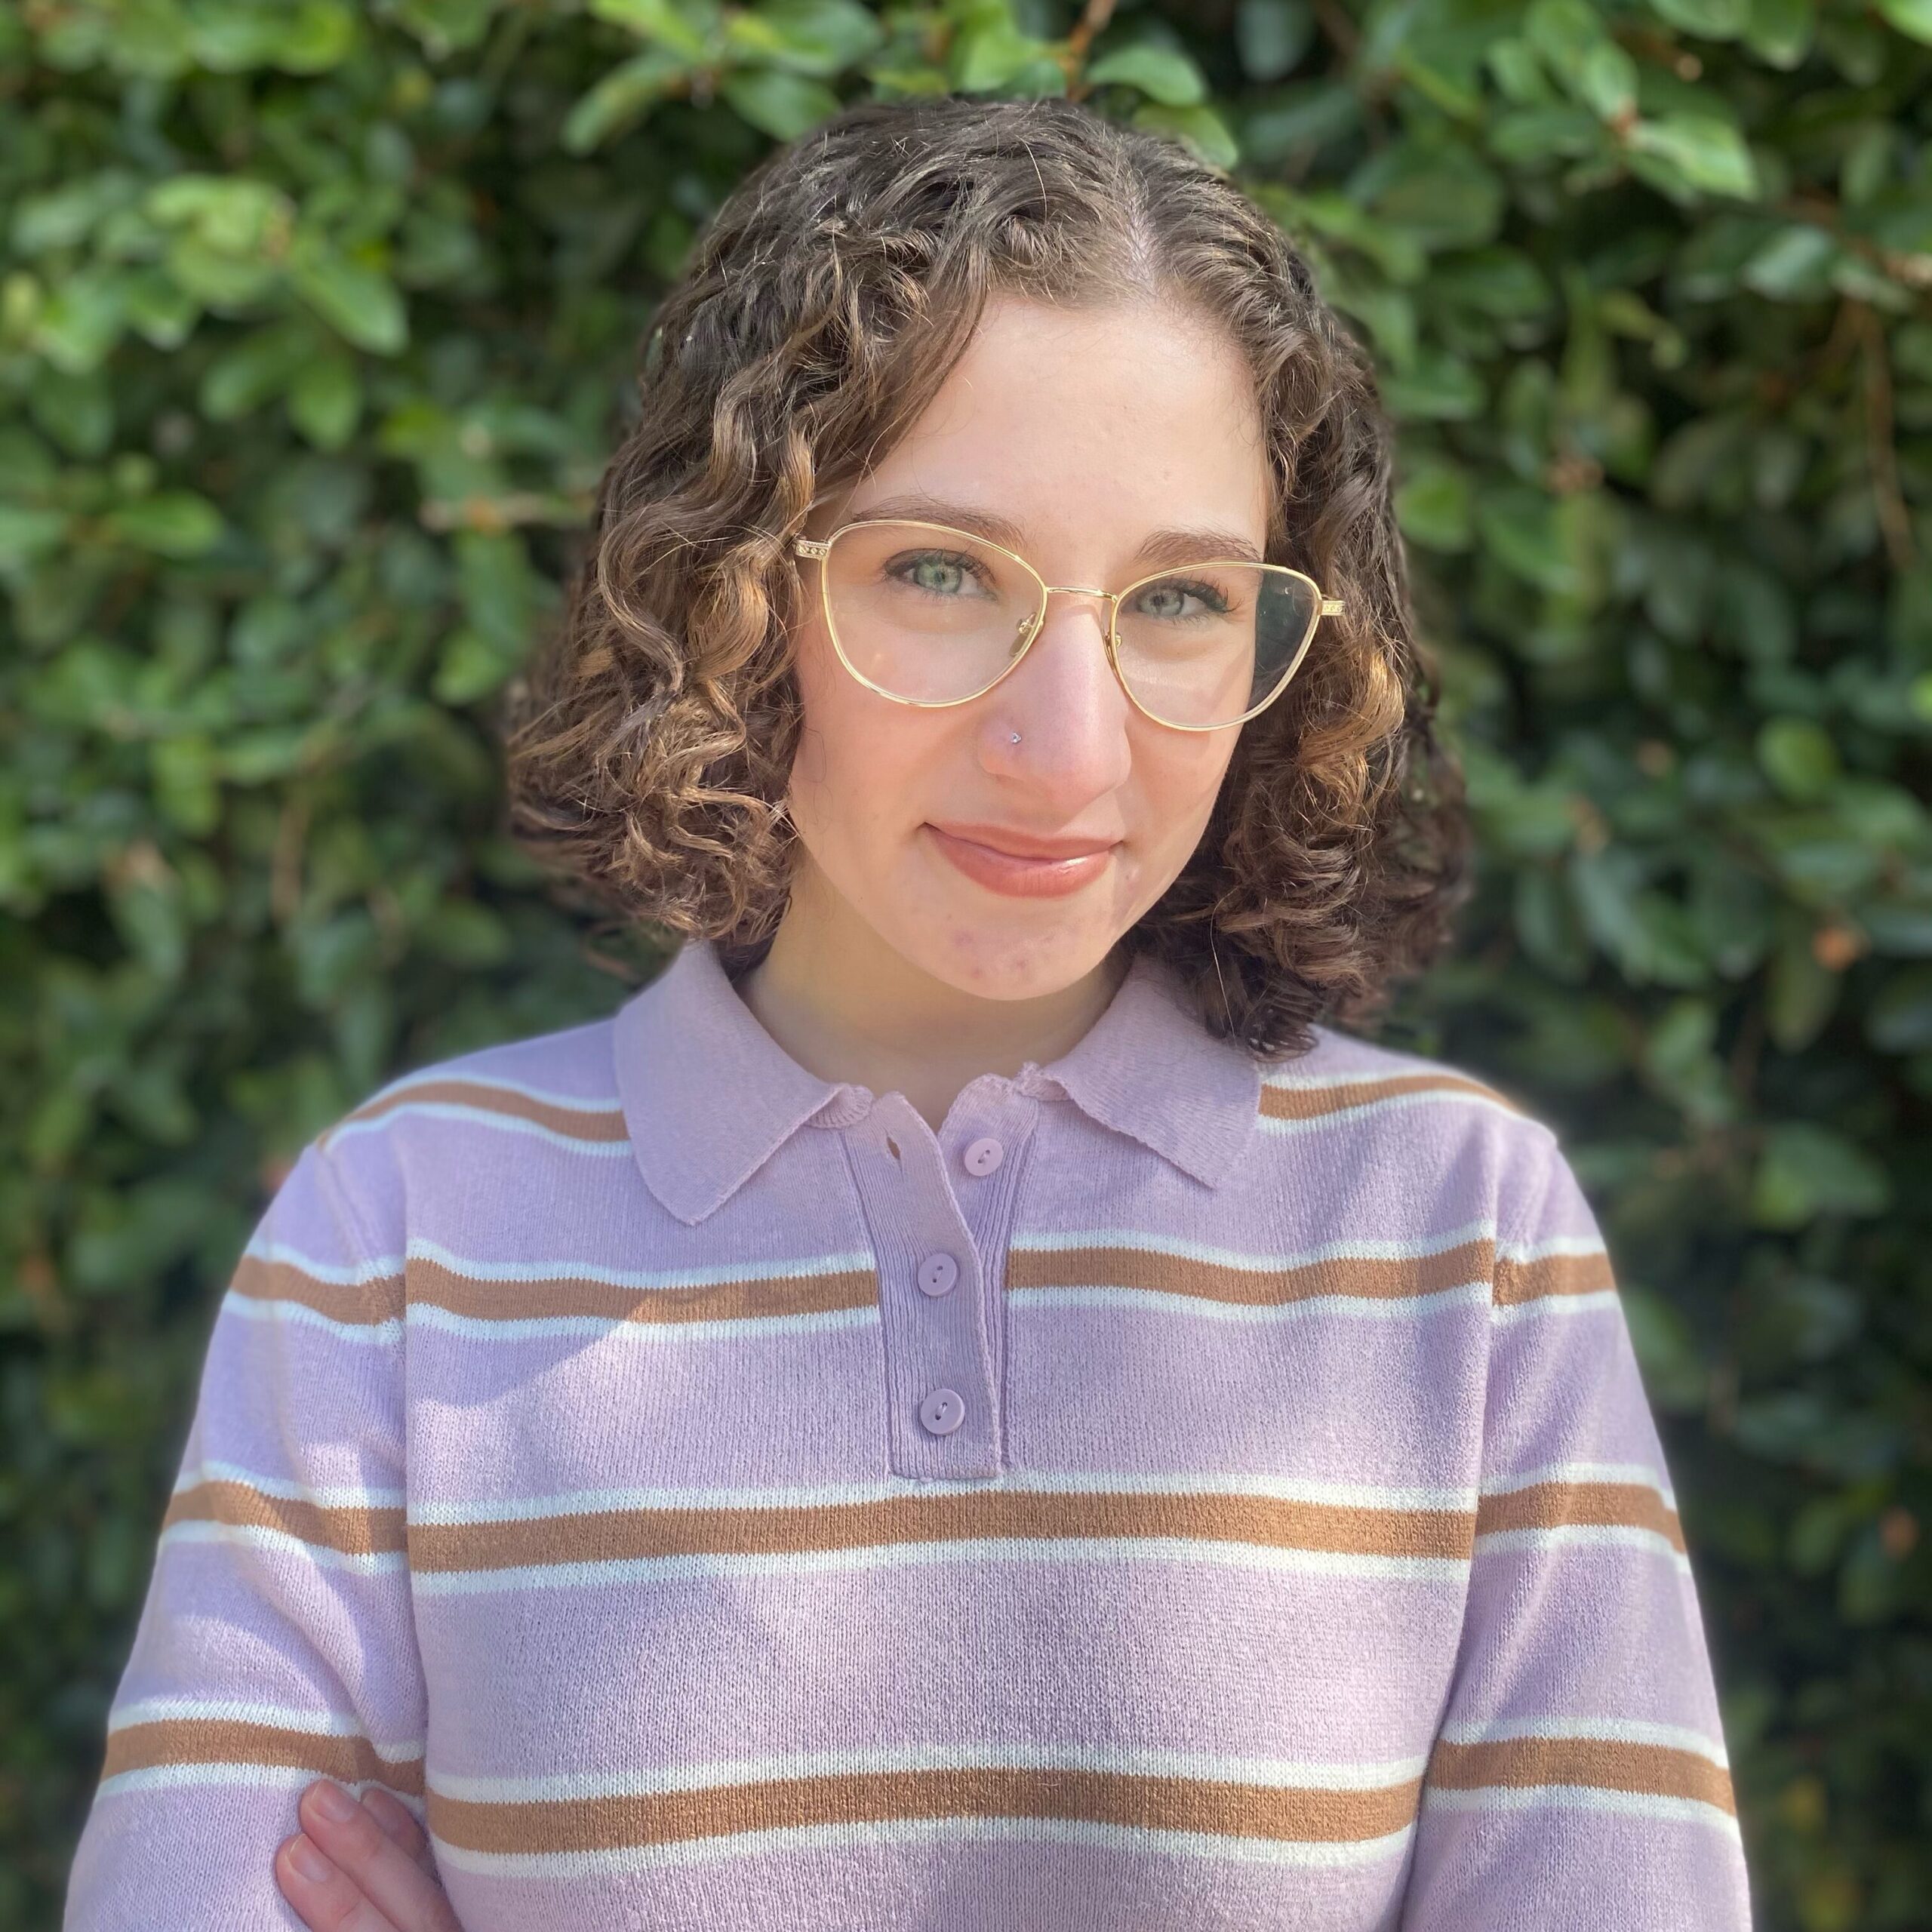 headshot of a young woman with curly brown hair and glasses wearing a lavender collared sweater